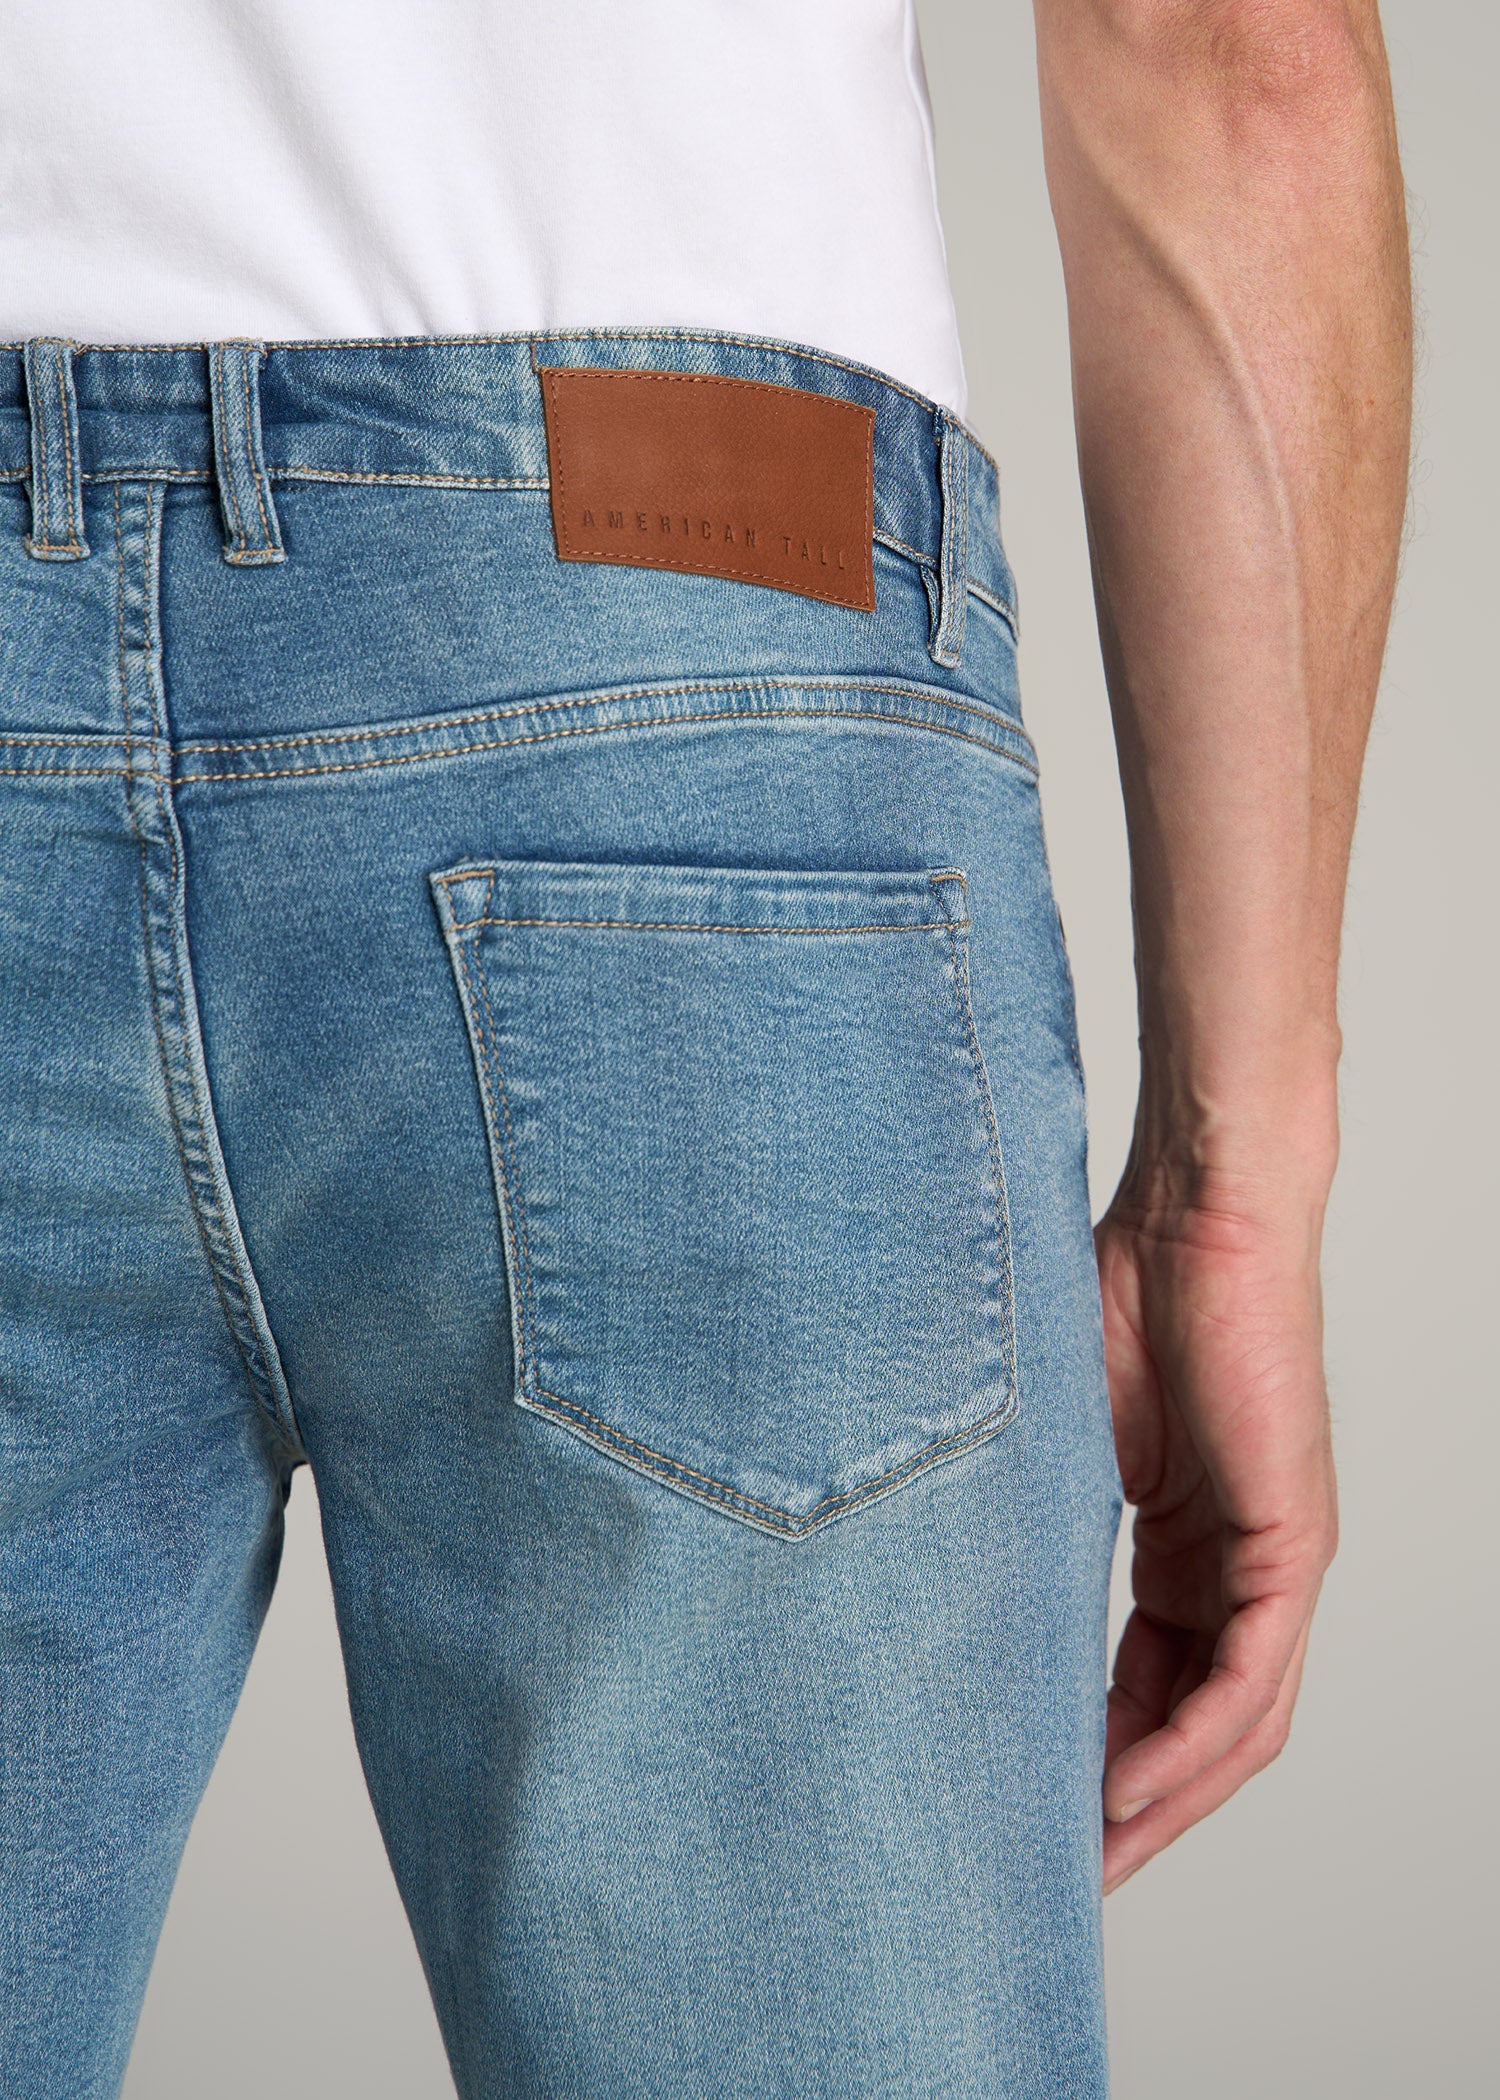 Carman Tapered Jeans For Tall Men New Fade | American Tall